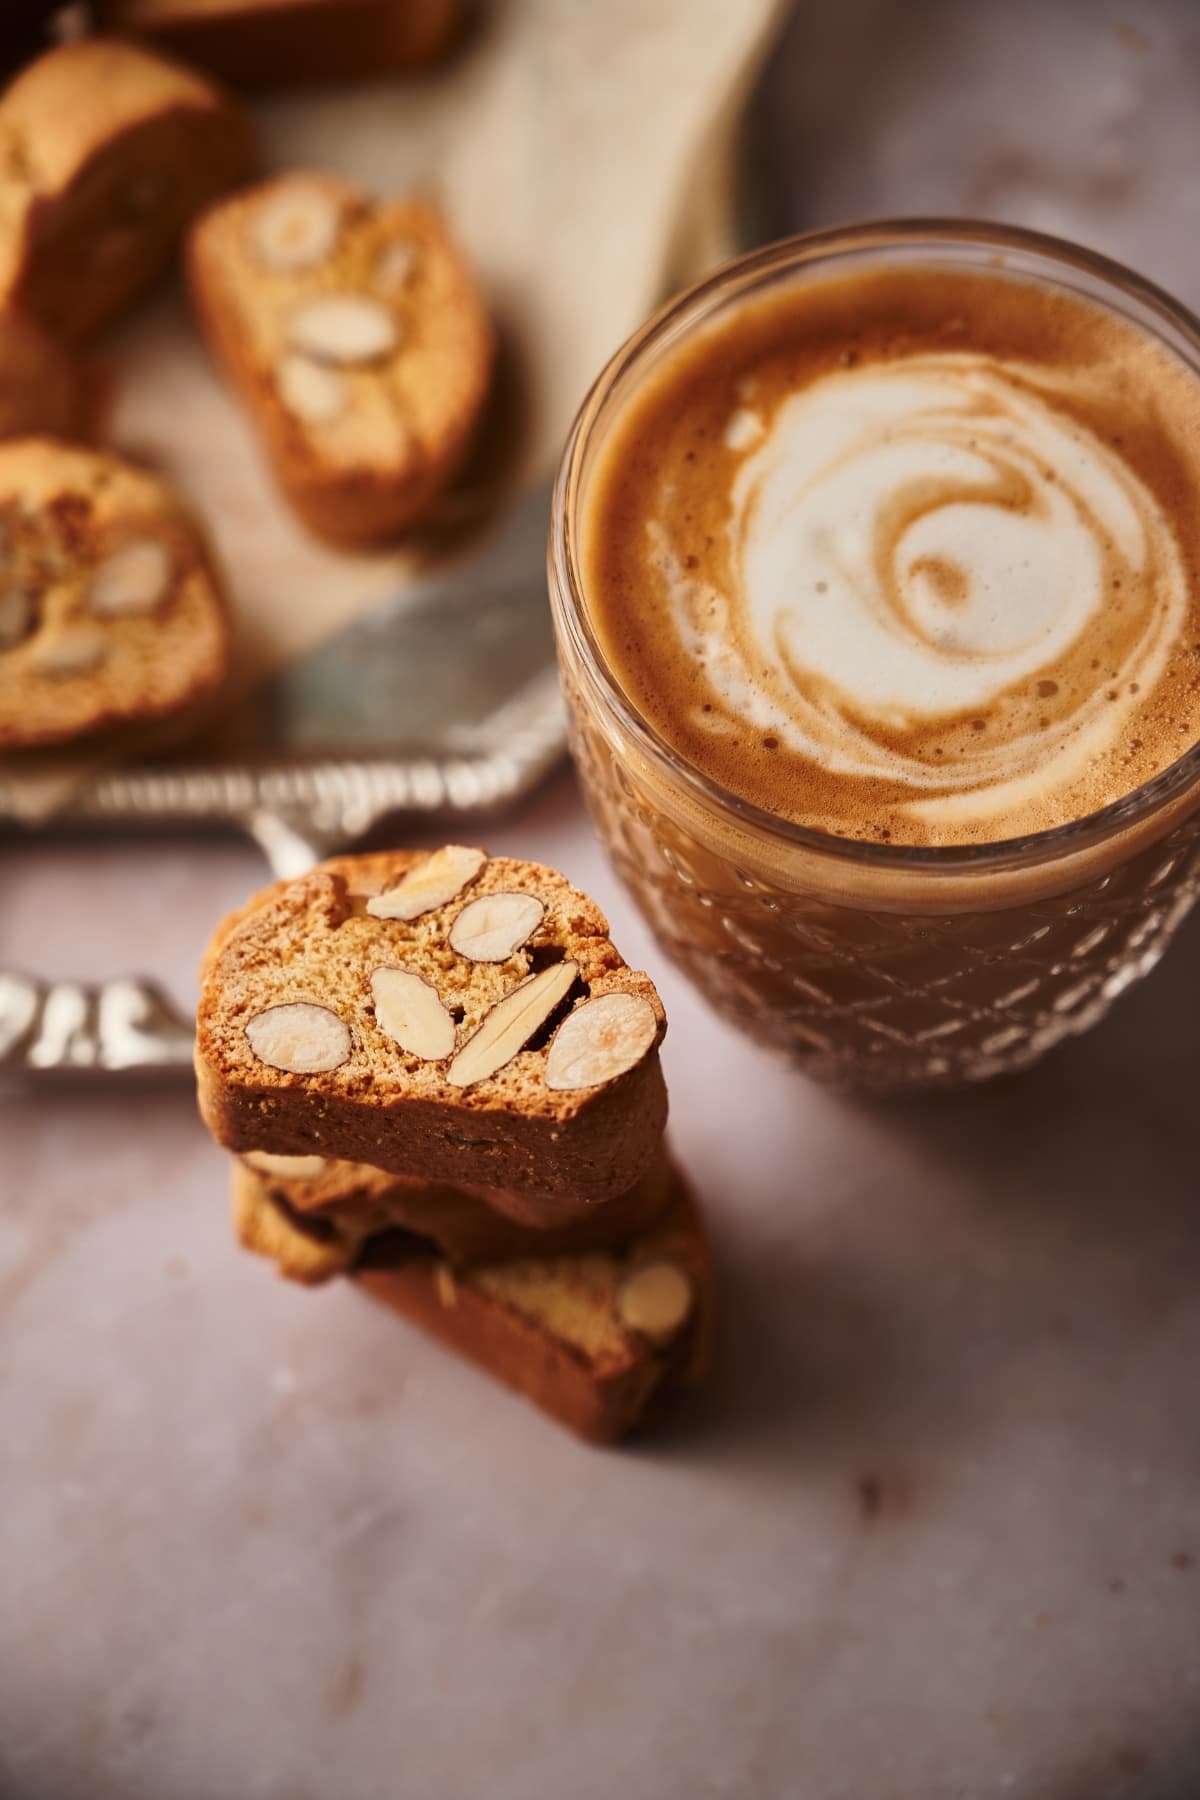 cantucci biscotti next to a cup of coffe with milk